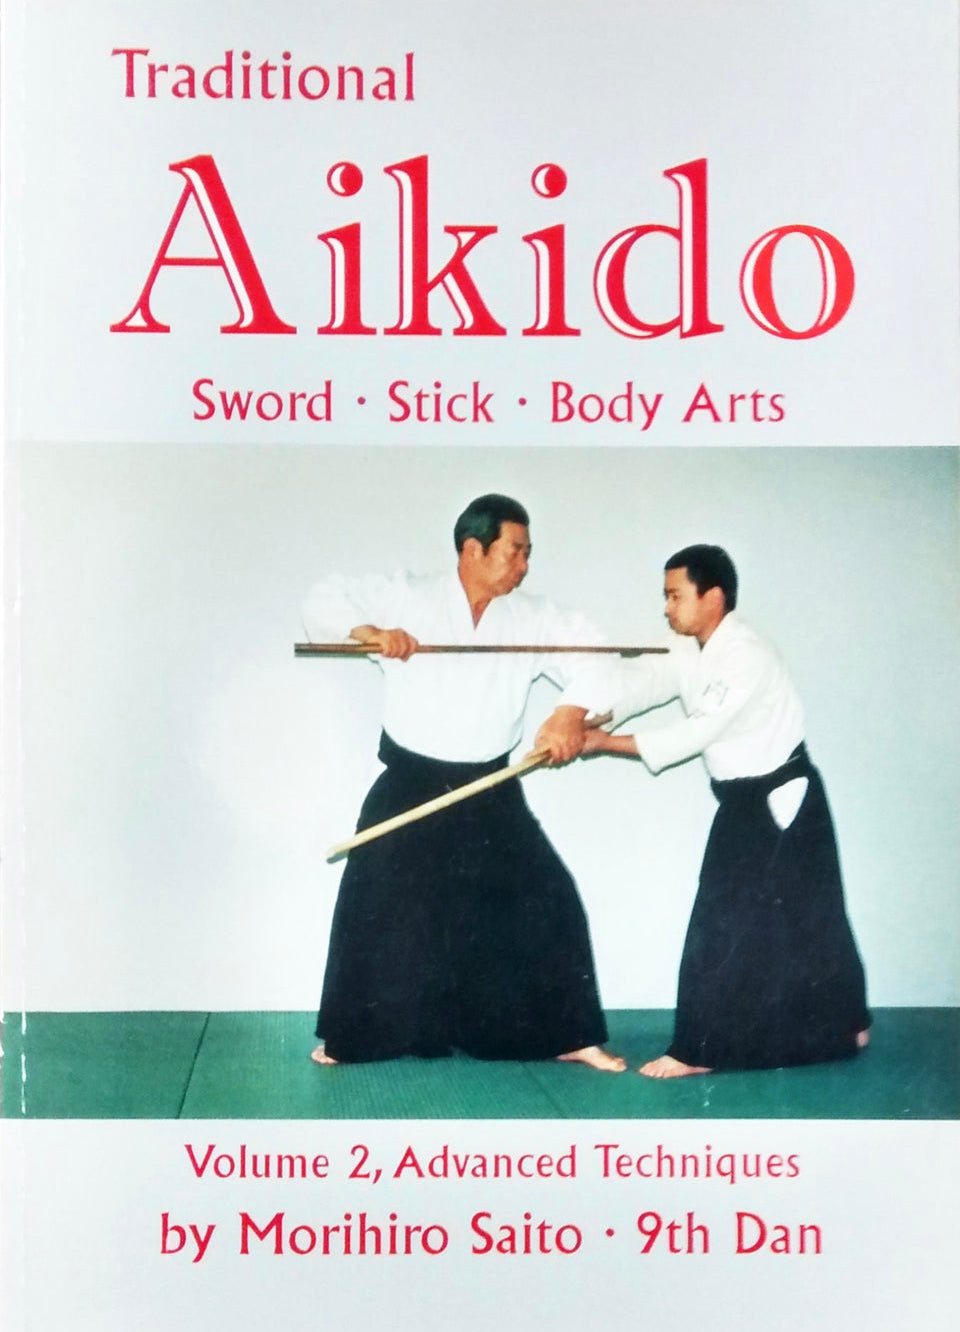 Traditional Aikido Complete 5 Book Set by Morihiro Saito (Preowned)